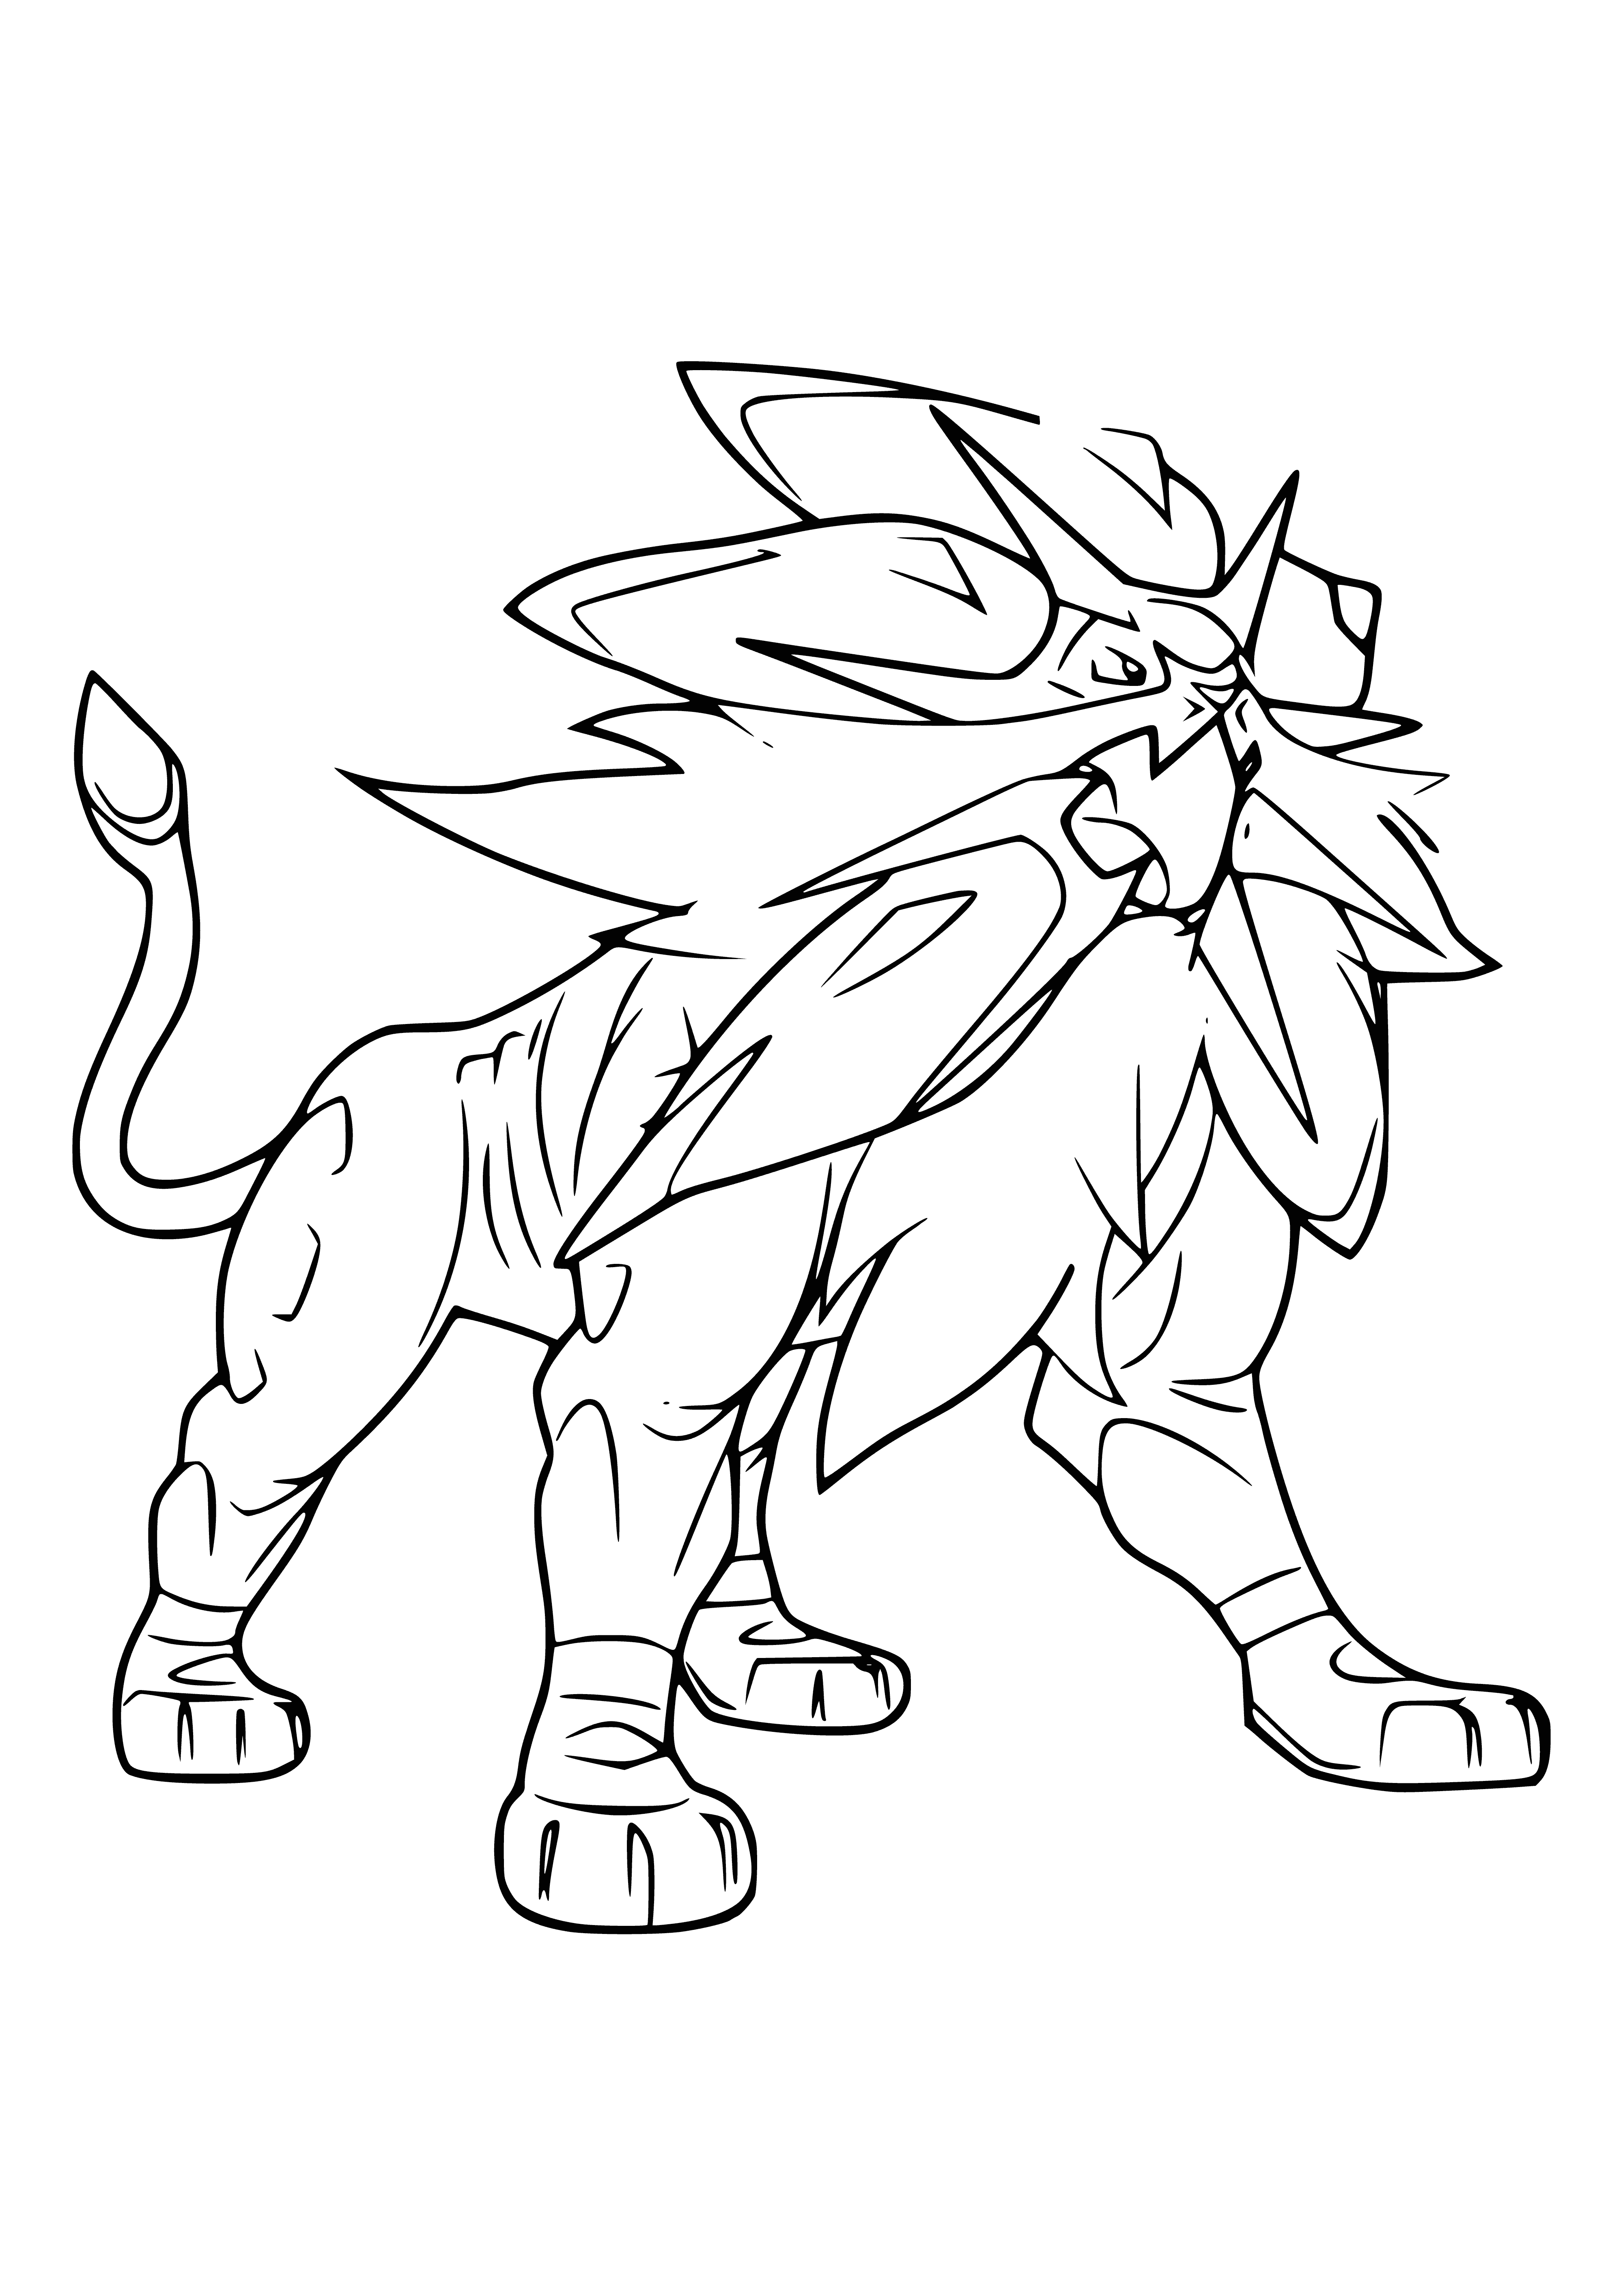 coloring page: A majestic lion-like Pokémon with golden fur, mane and large wings, and a bright red gem. Its tail whips powerfully, said to be created by Solgaleo and Lunala. #Pokémon #Alola